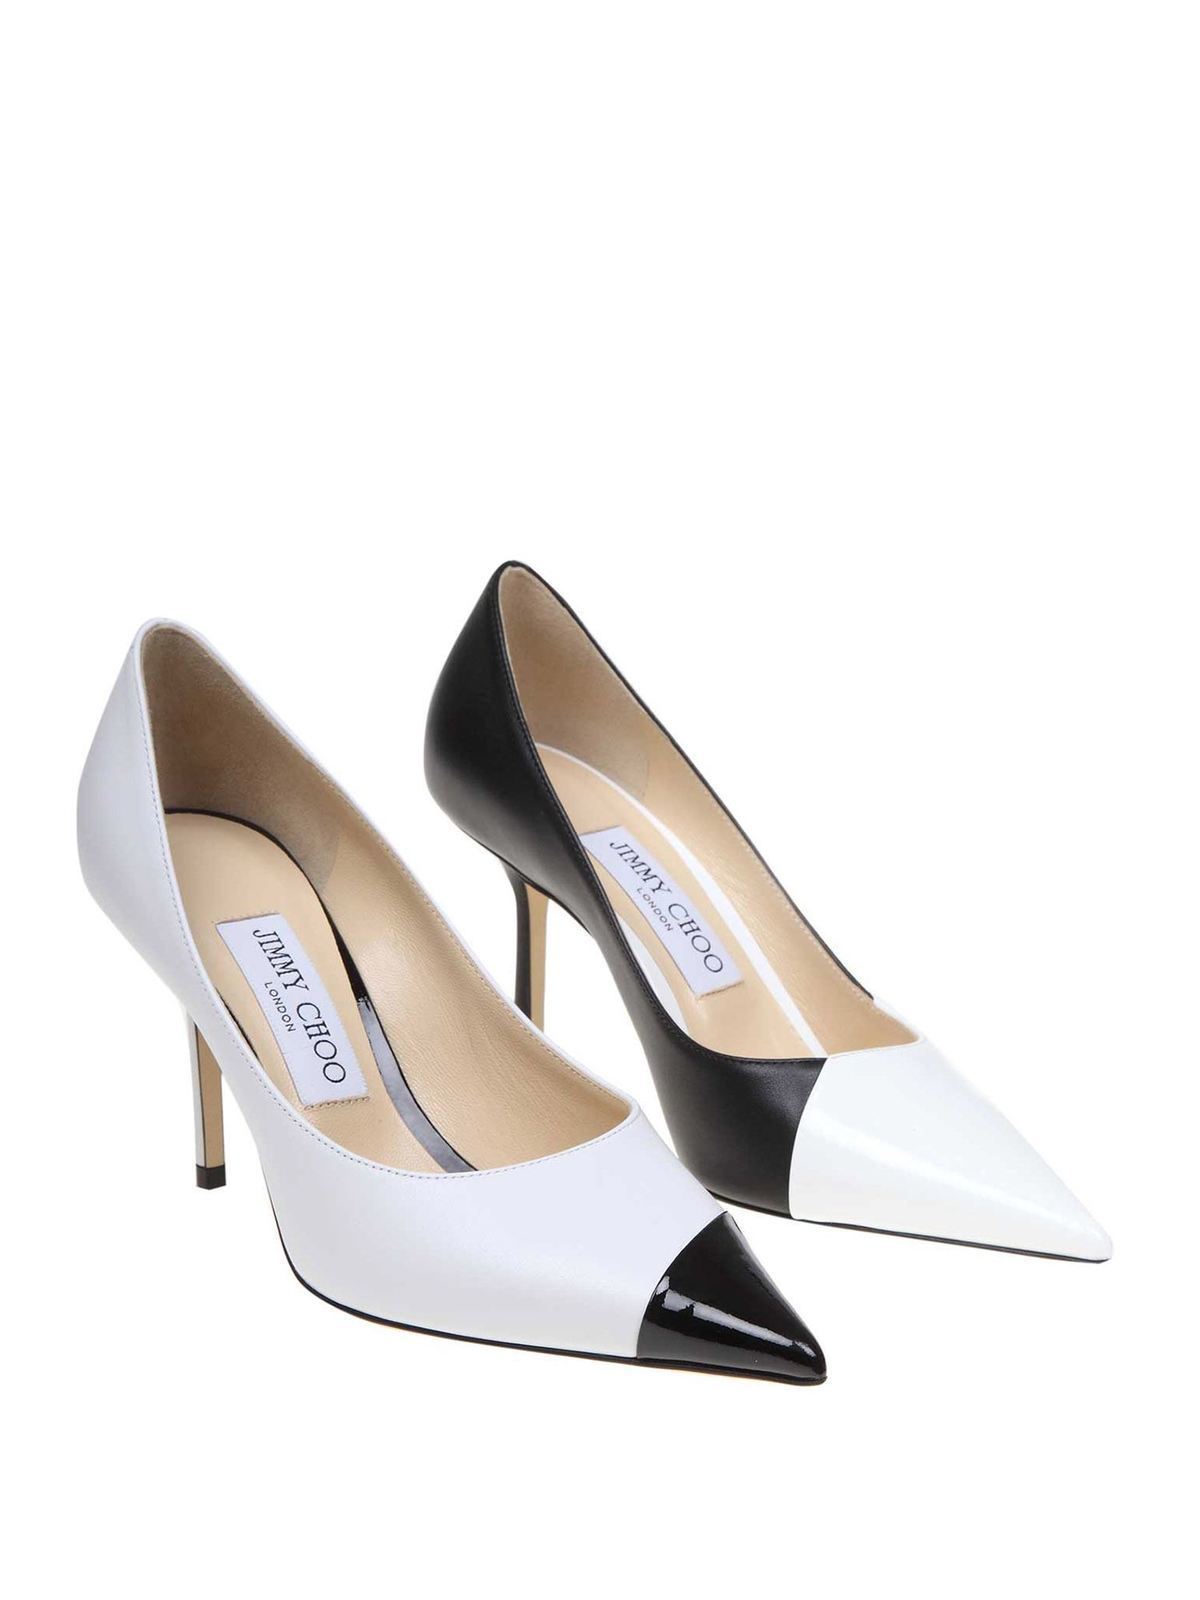 shoes Jimmy Choo - Love 85 pumps in white leather - LOVE85ZYZBLACK&WHITE